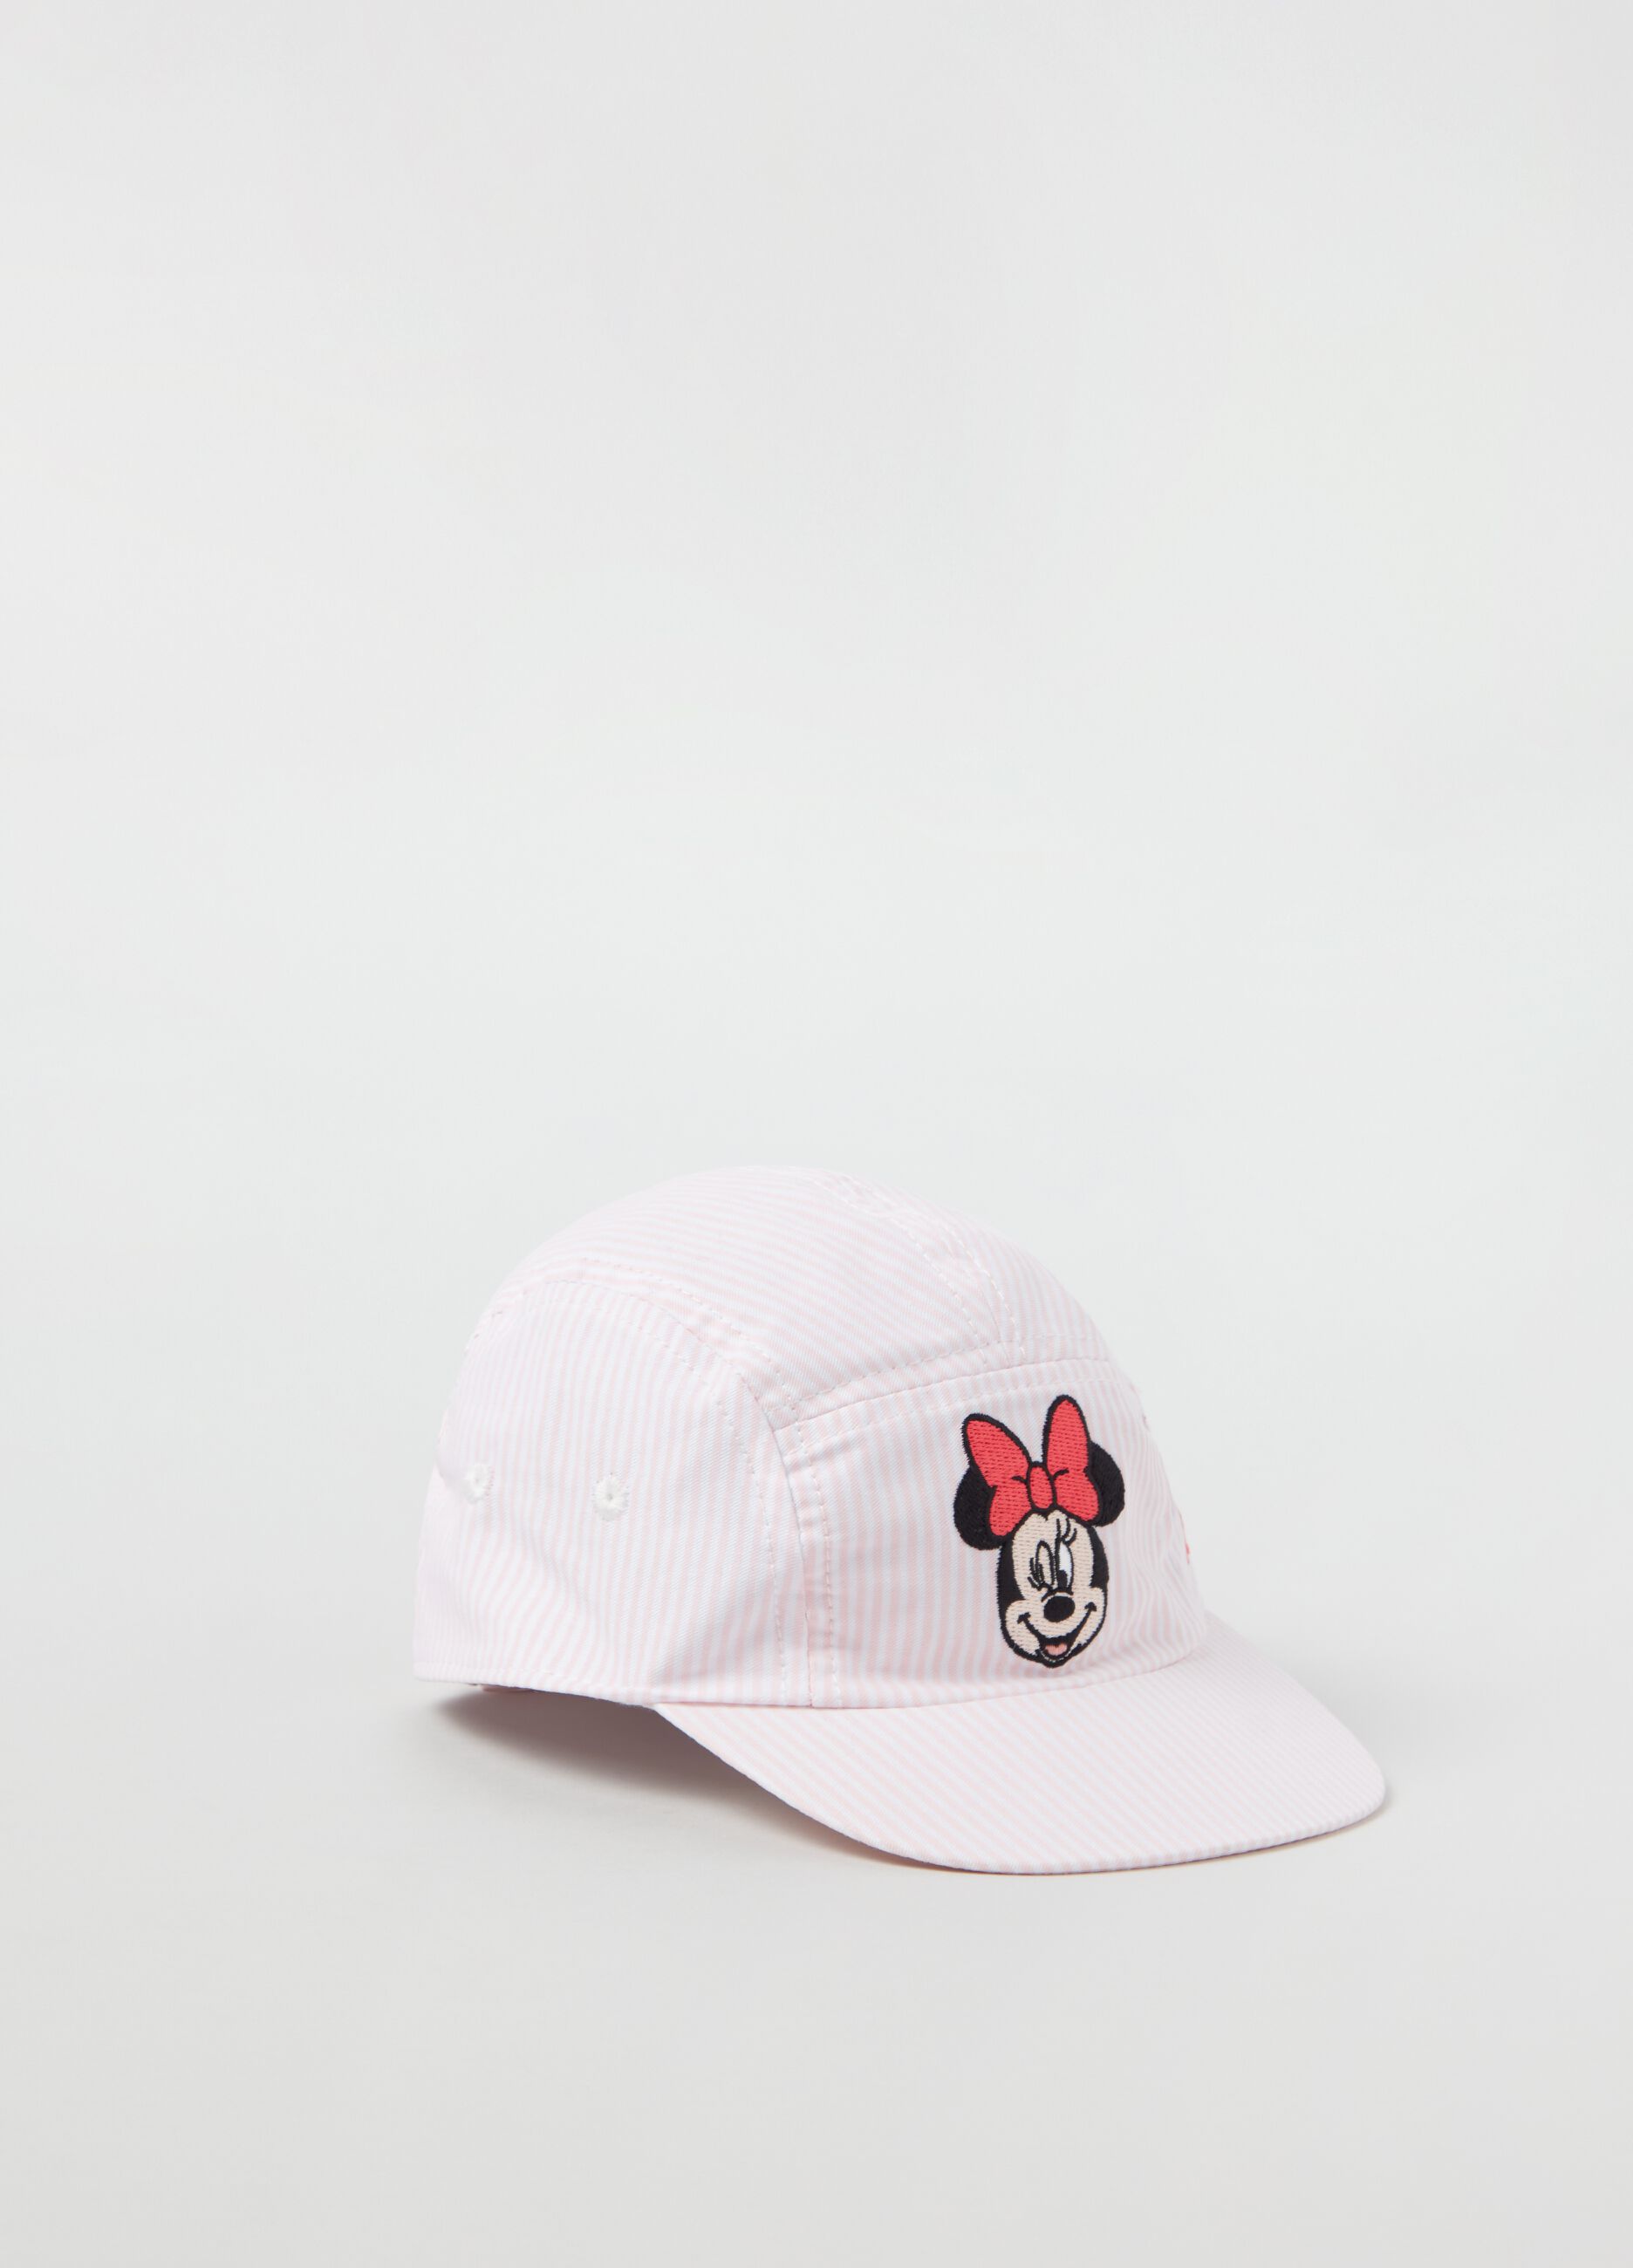 Baseball cap with Minnie Mouse embroidery